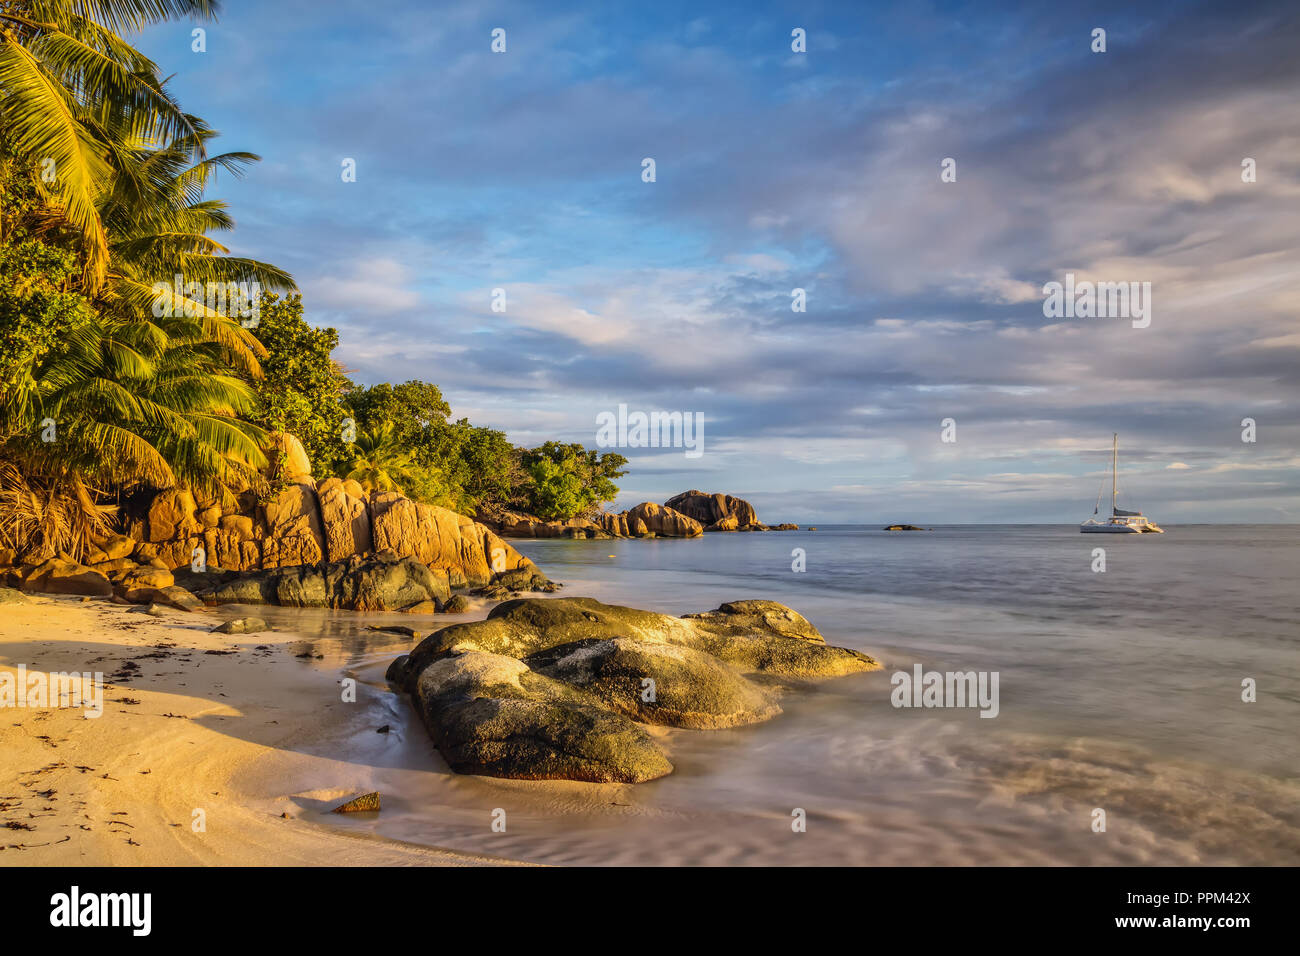 A golden sunset at the Anse Bateau on Praslin creates a wonderful and tropical atmosphere. Stock Photo